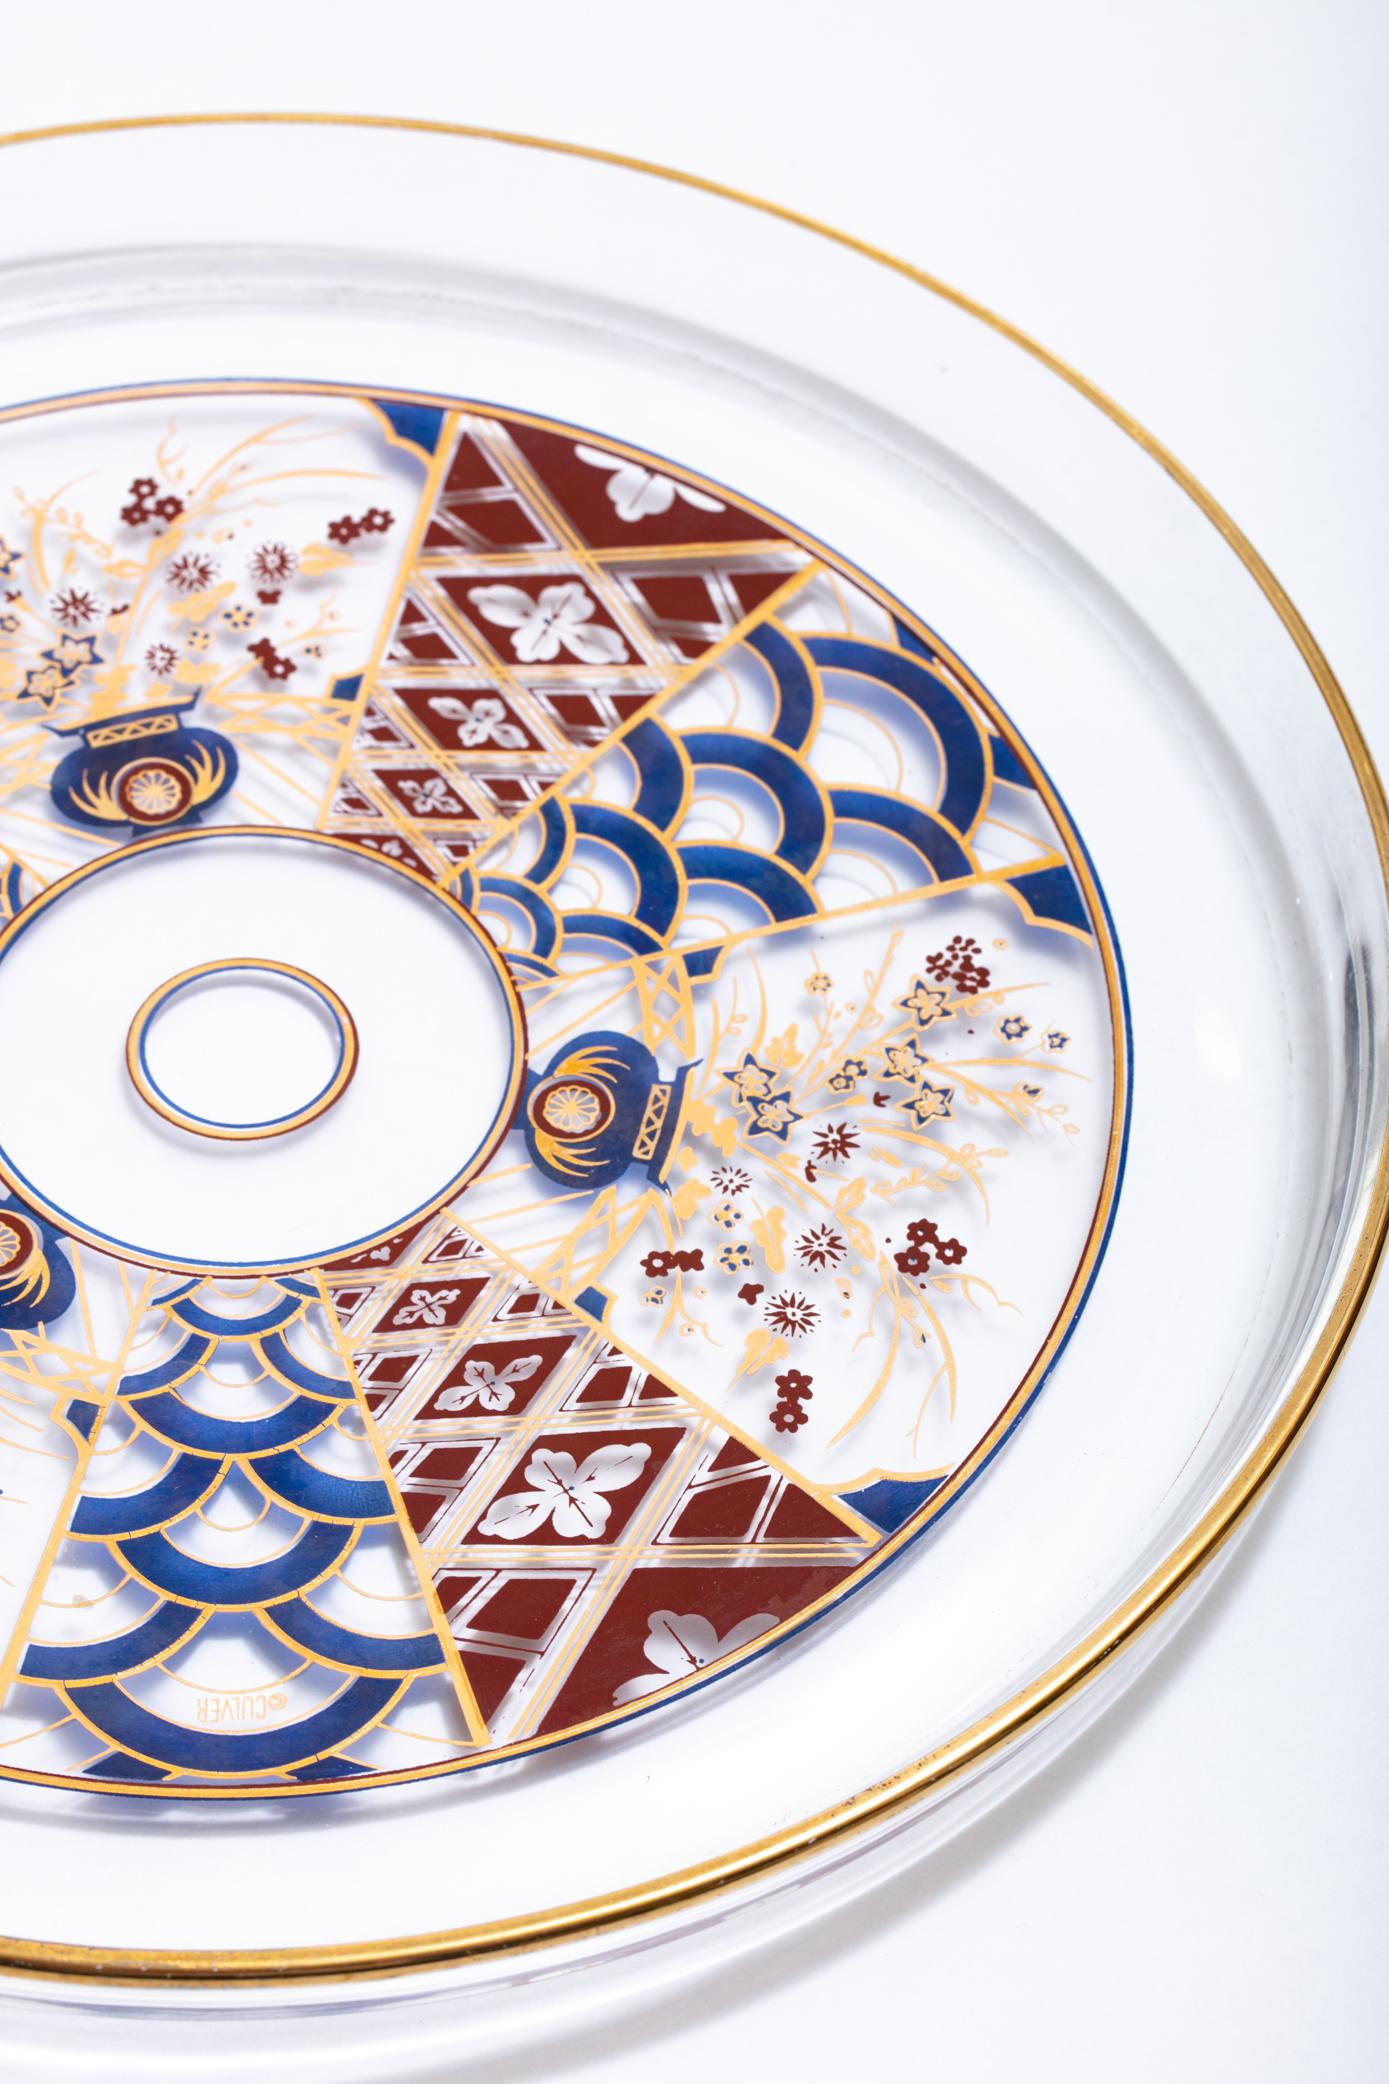 Vintage and with such a beautifully delicate Chinoiserie pattern, this Hors d'oeuvre platter features a 22-karat gold plated rim. Up your entertaining with this beautiful and unique addition. We have additional glassware to match in our inventory so